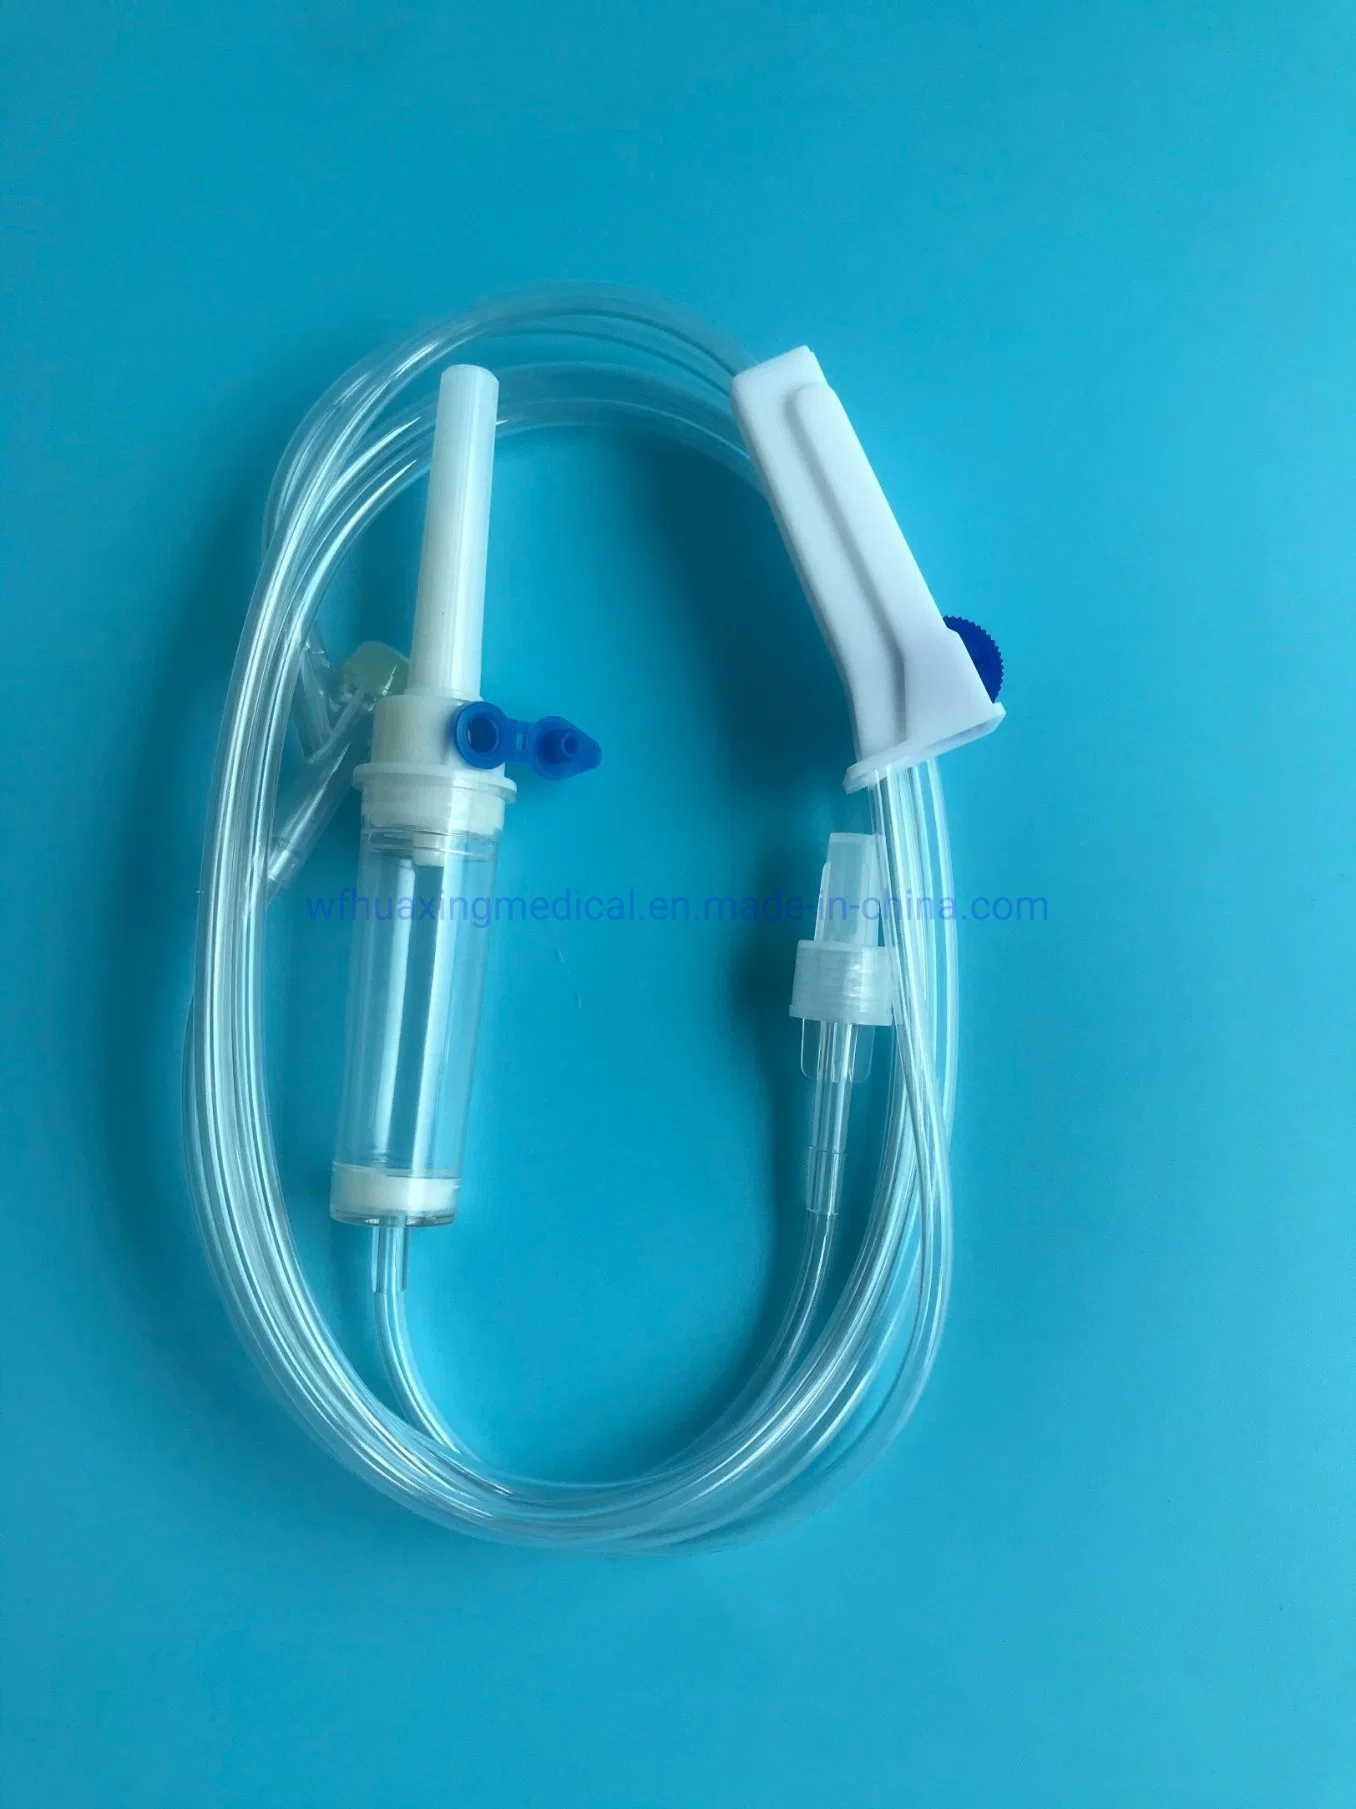 Medical Equipment Disposable Infusion Giving Set Without Needle Luer Lock